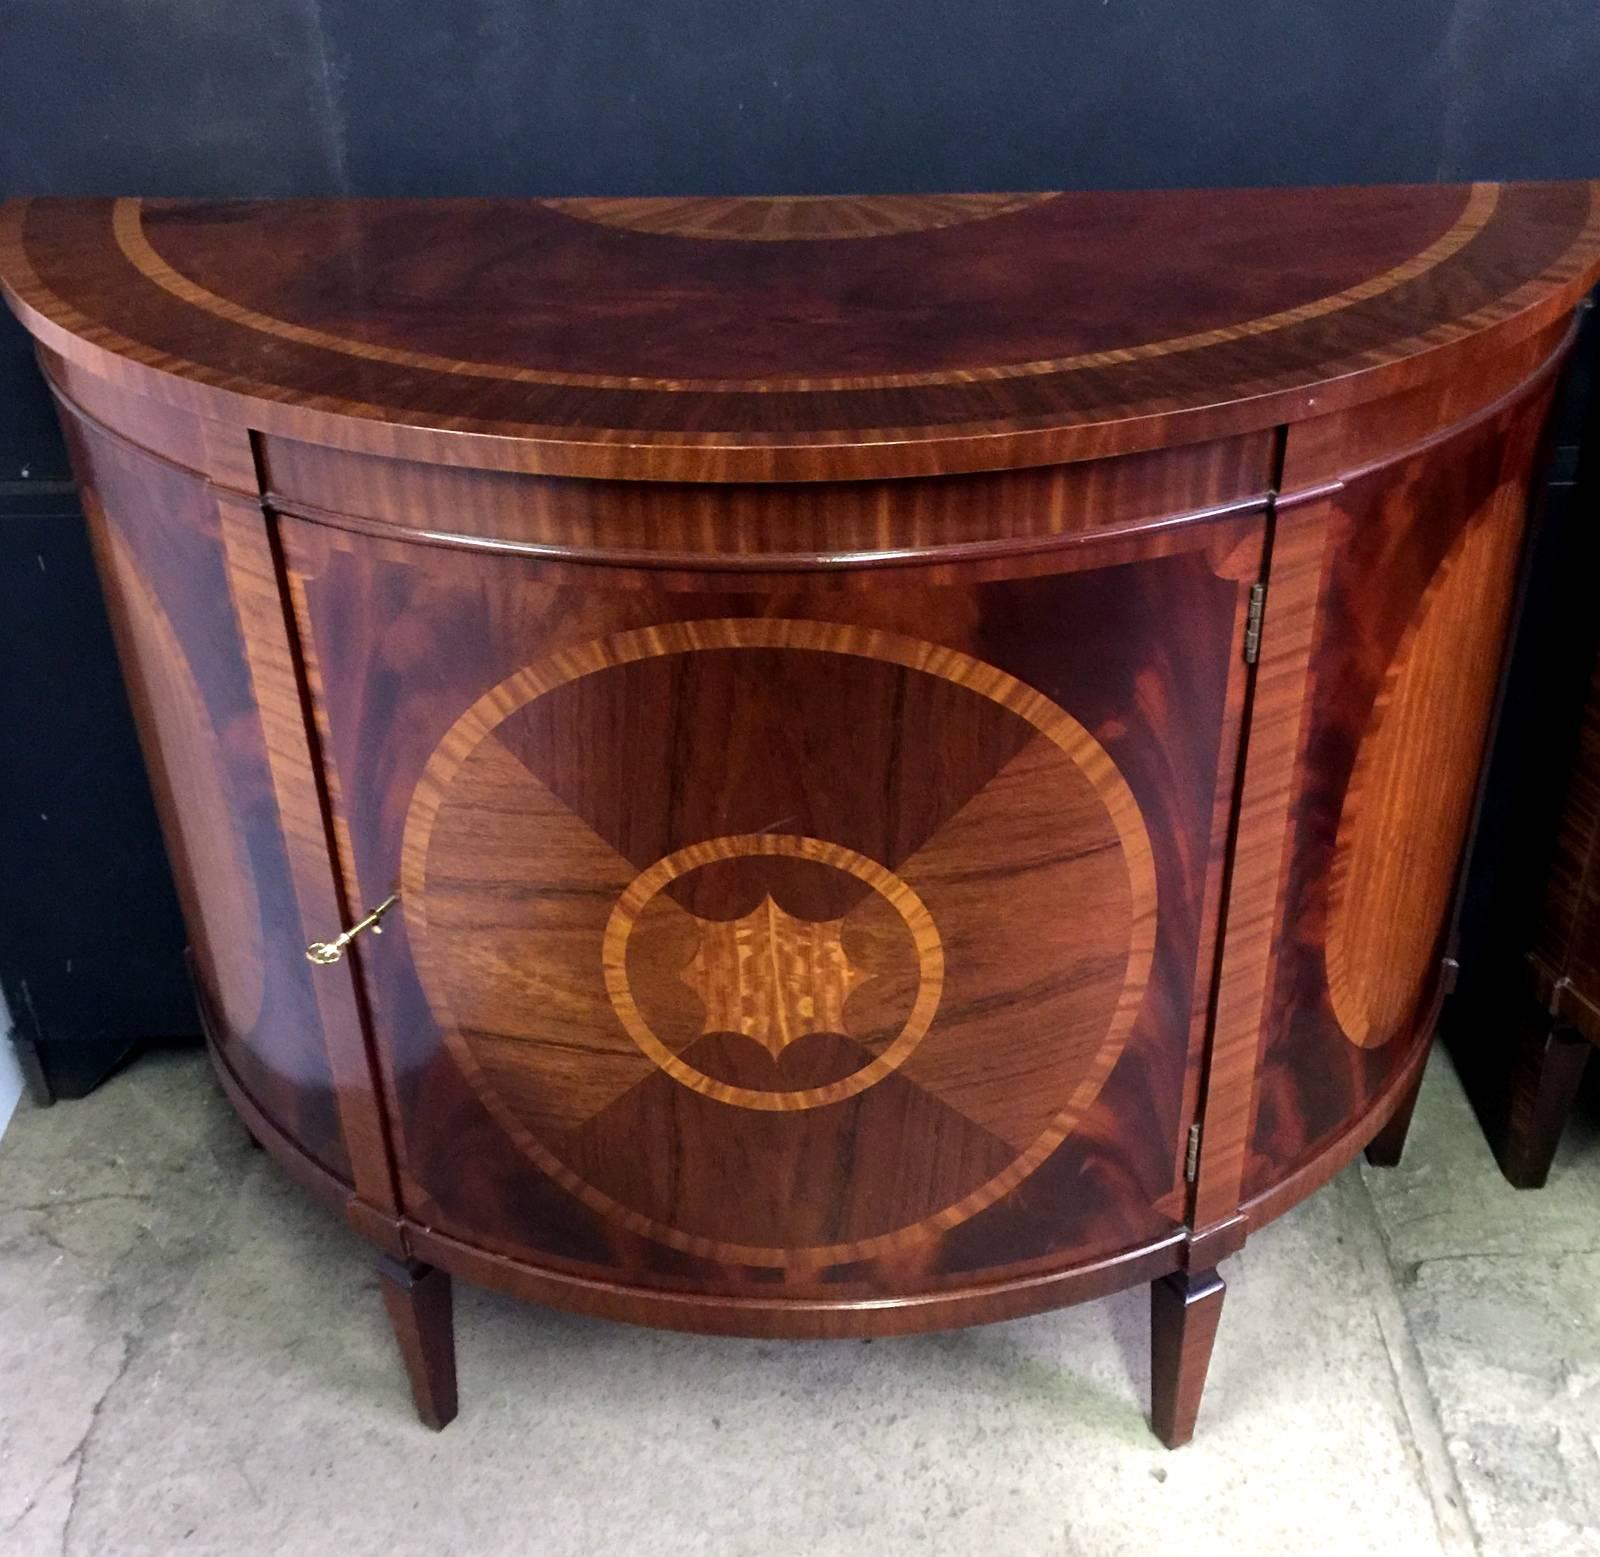 A fabulous pair of mahogany and satinwood inlaid demilune commodes. The highly inlaid tops over a curved inlaid door complete with shelf resting on four tapered feet. Made by the premier American furniture company. Baker....complete with keys.